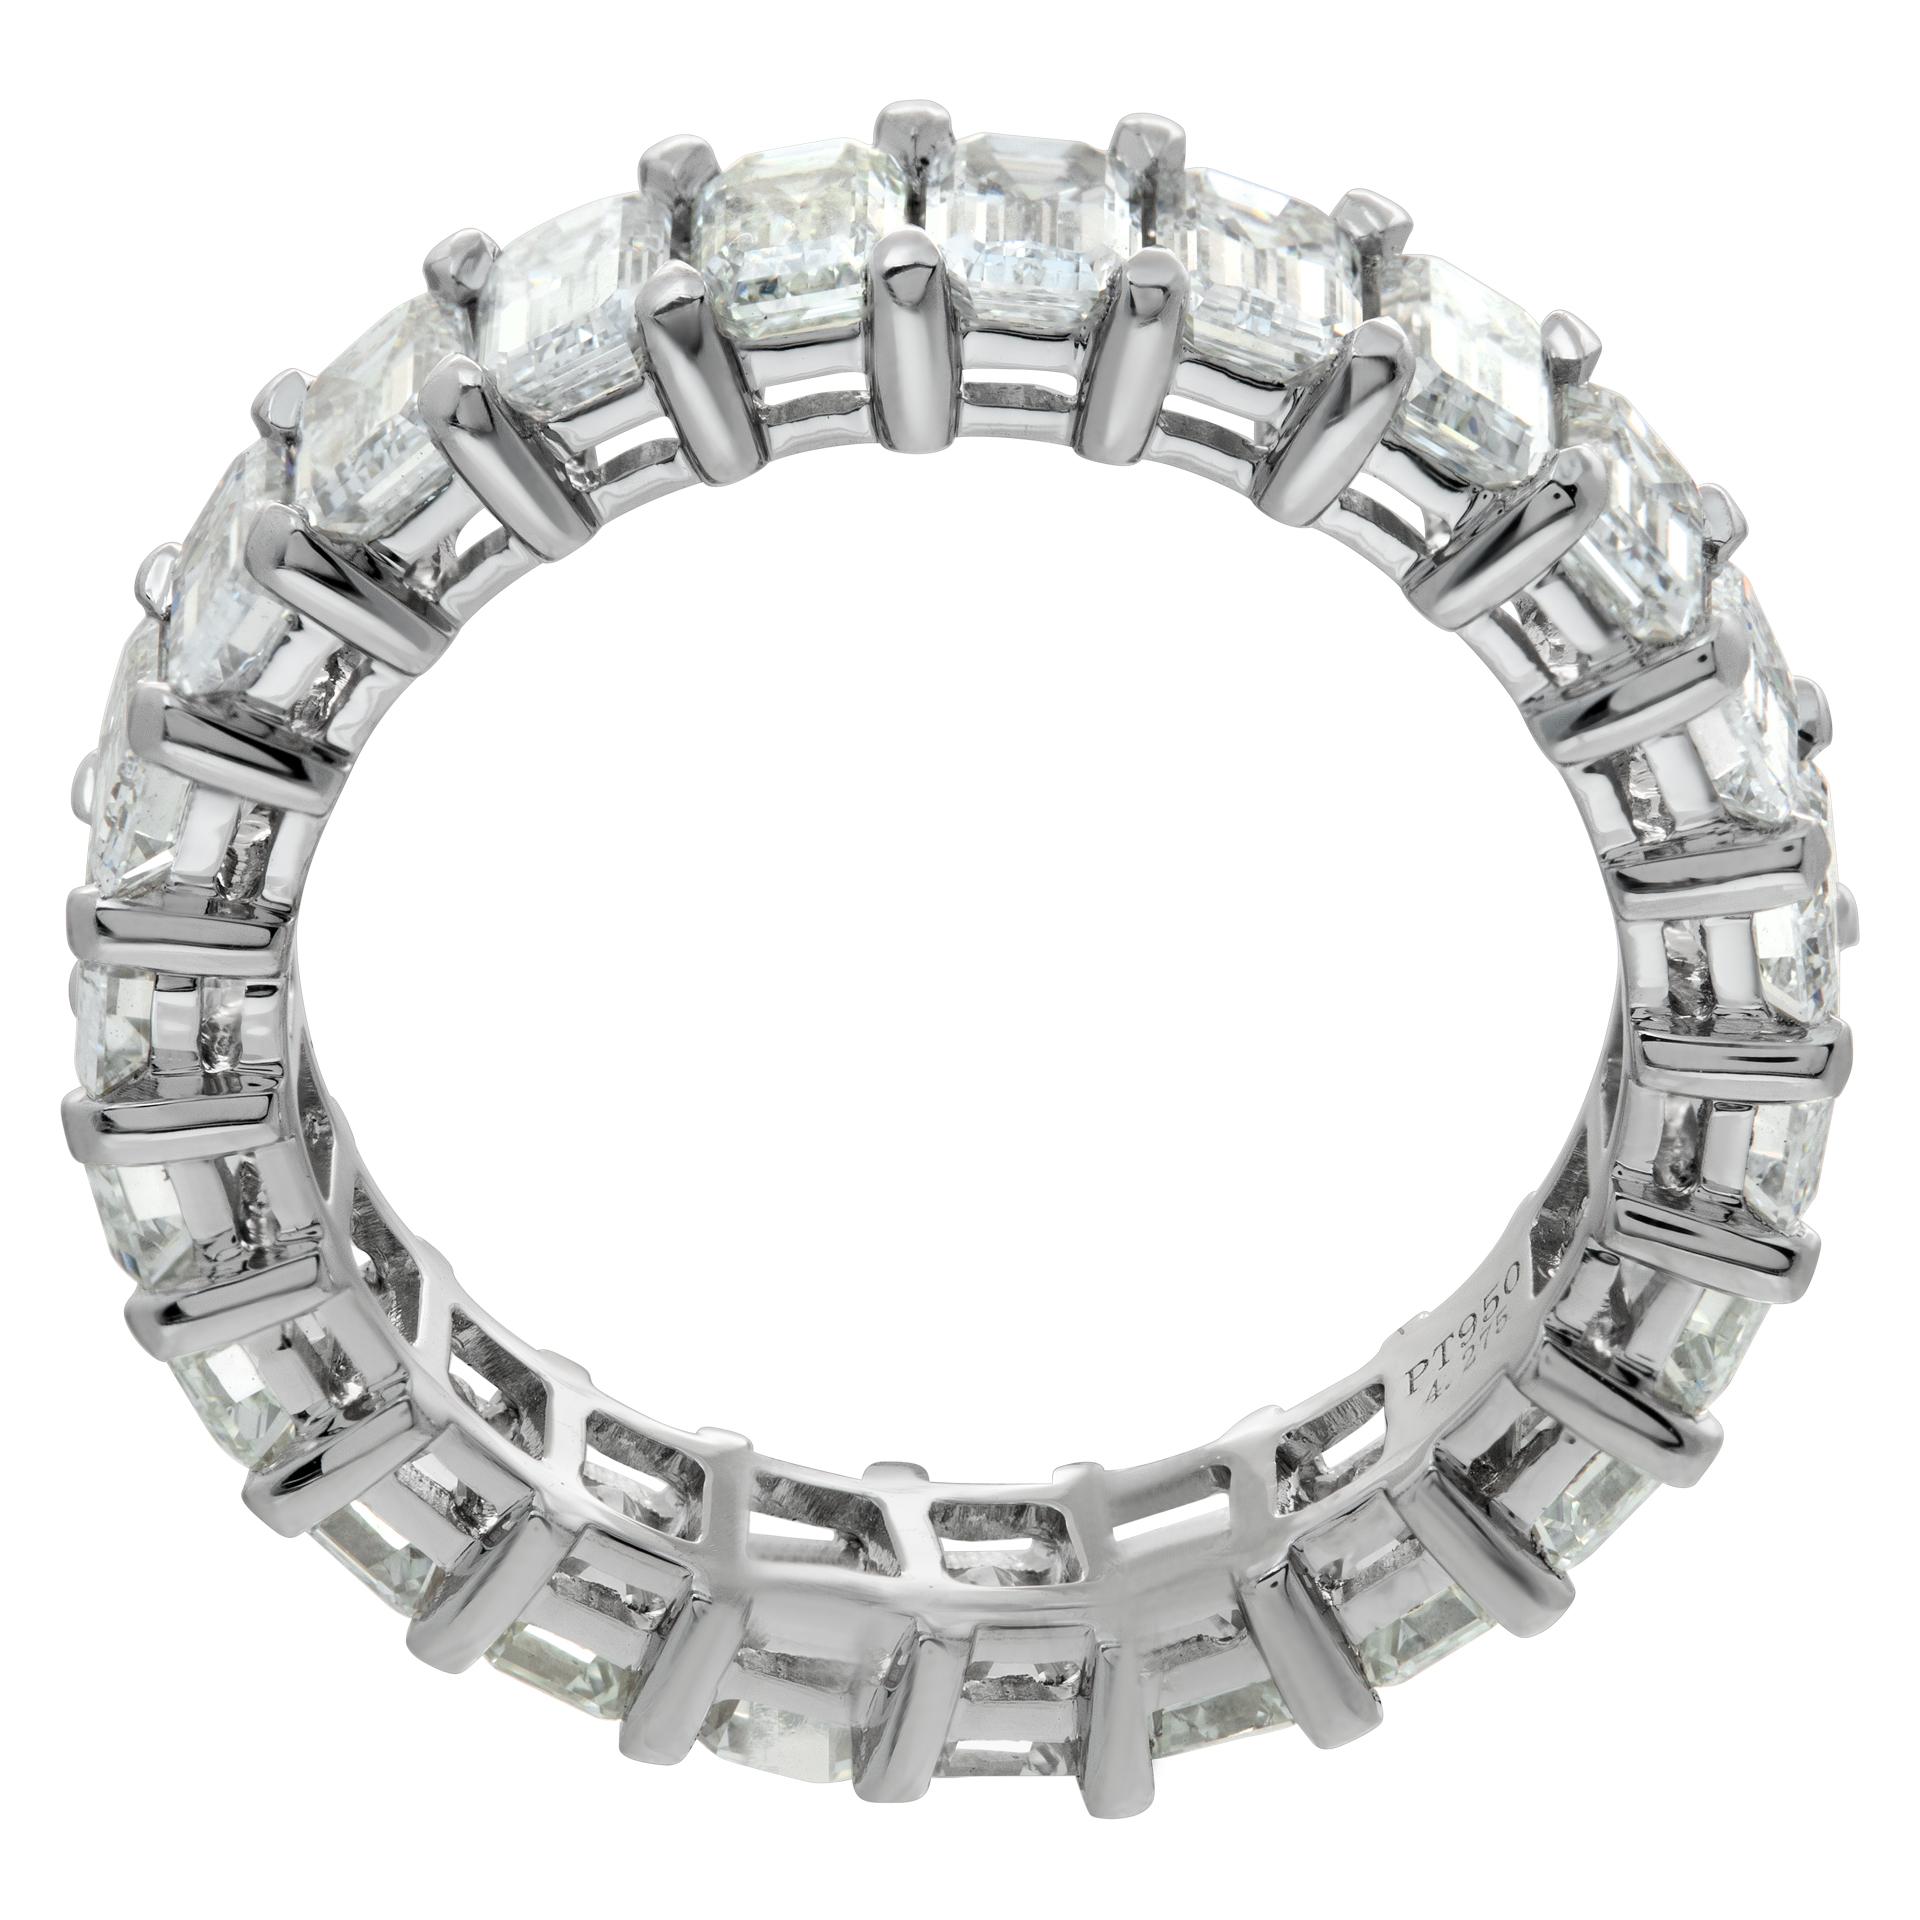 Platinum emerald cut diamond eternity band In Excellent Condition For Sale In Surfside, FL